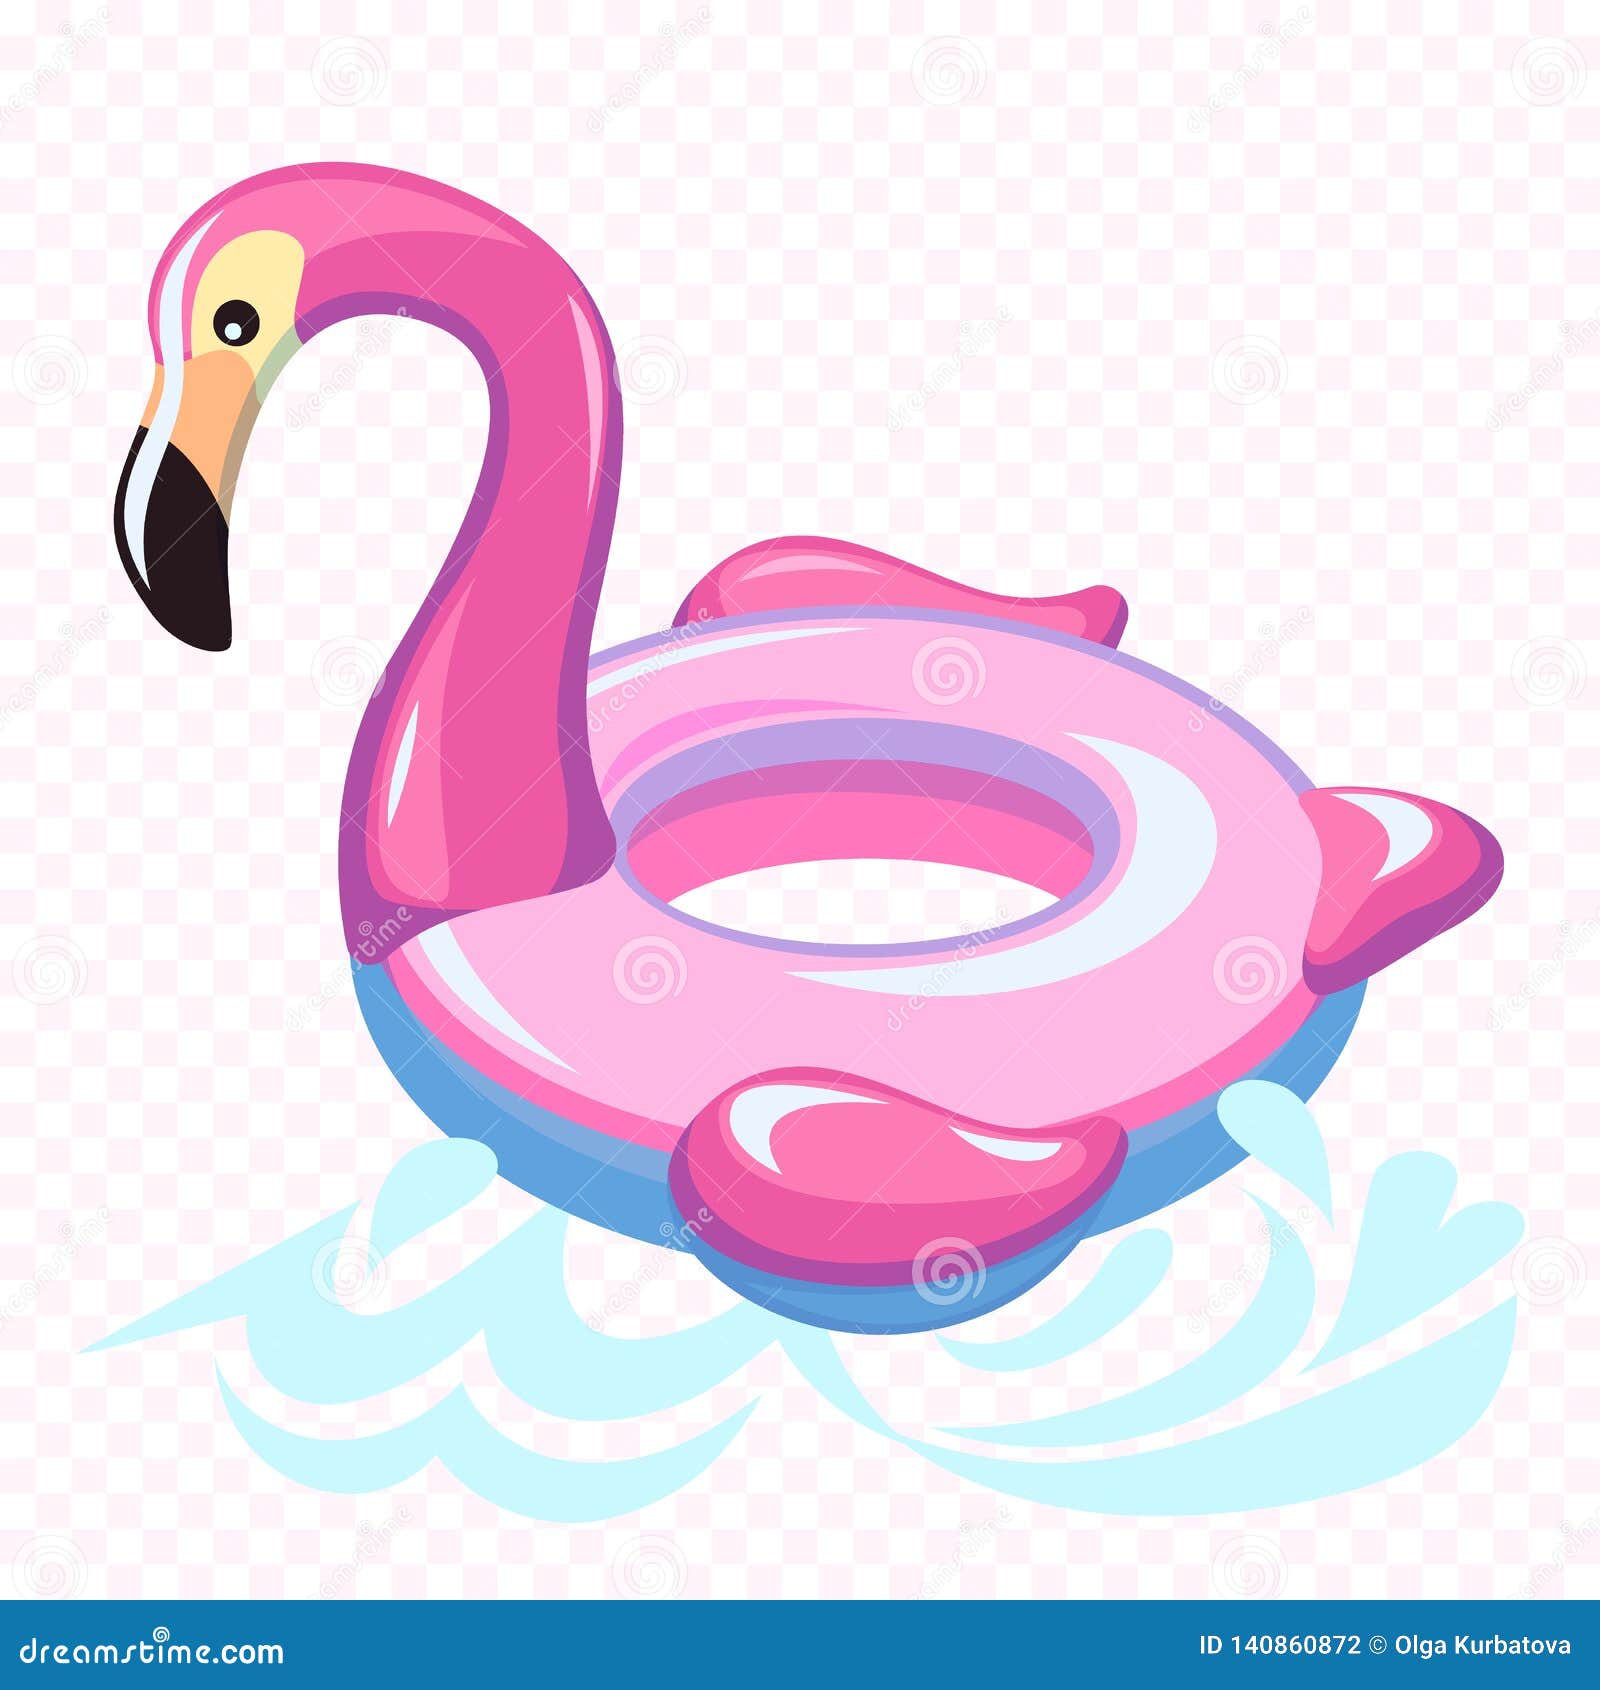 swimming flamingo. swim summer water pool inflatable toy pink flamingo float beach sea rings with marine waves concept